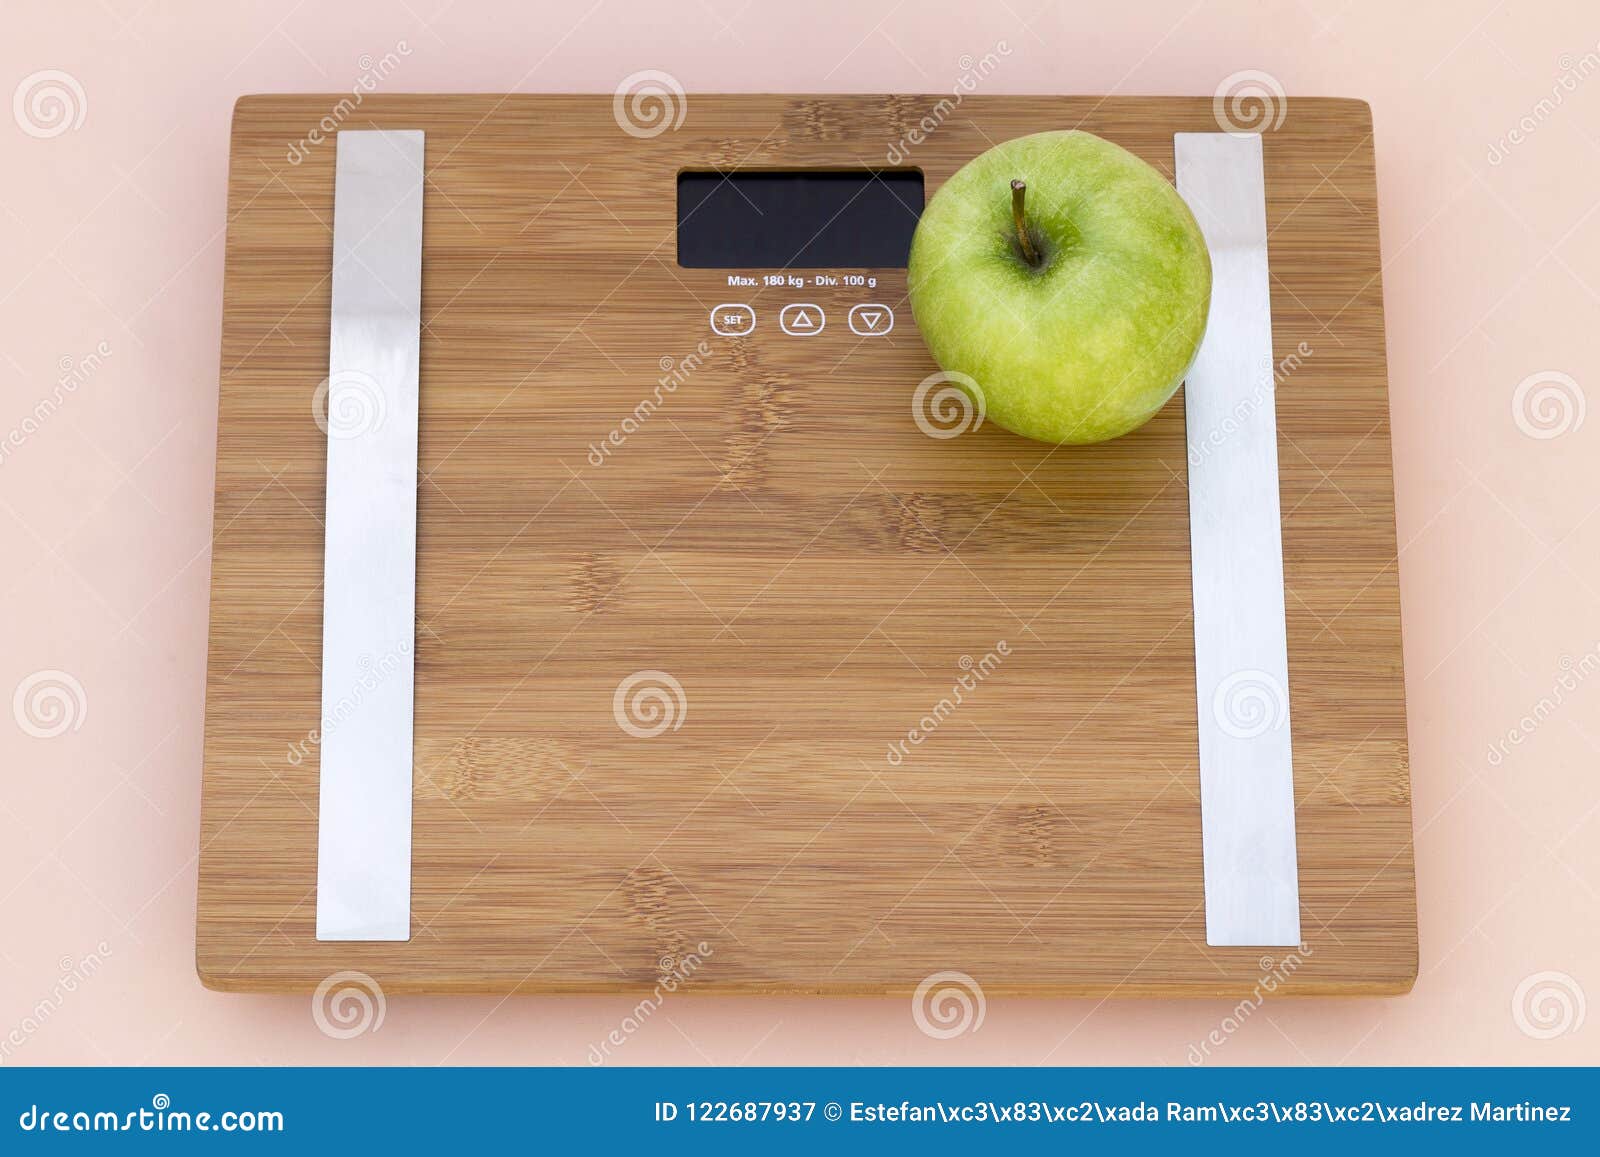 still life photography with a green apple and a scale